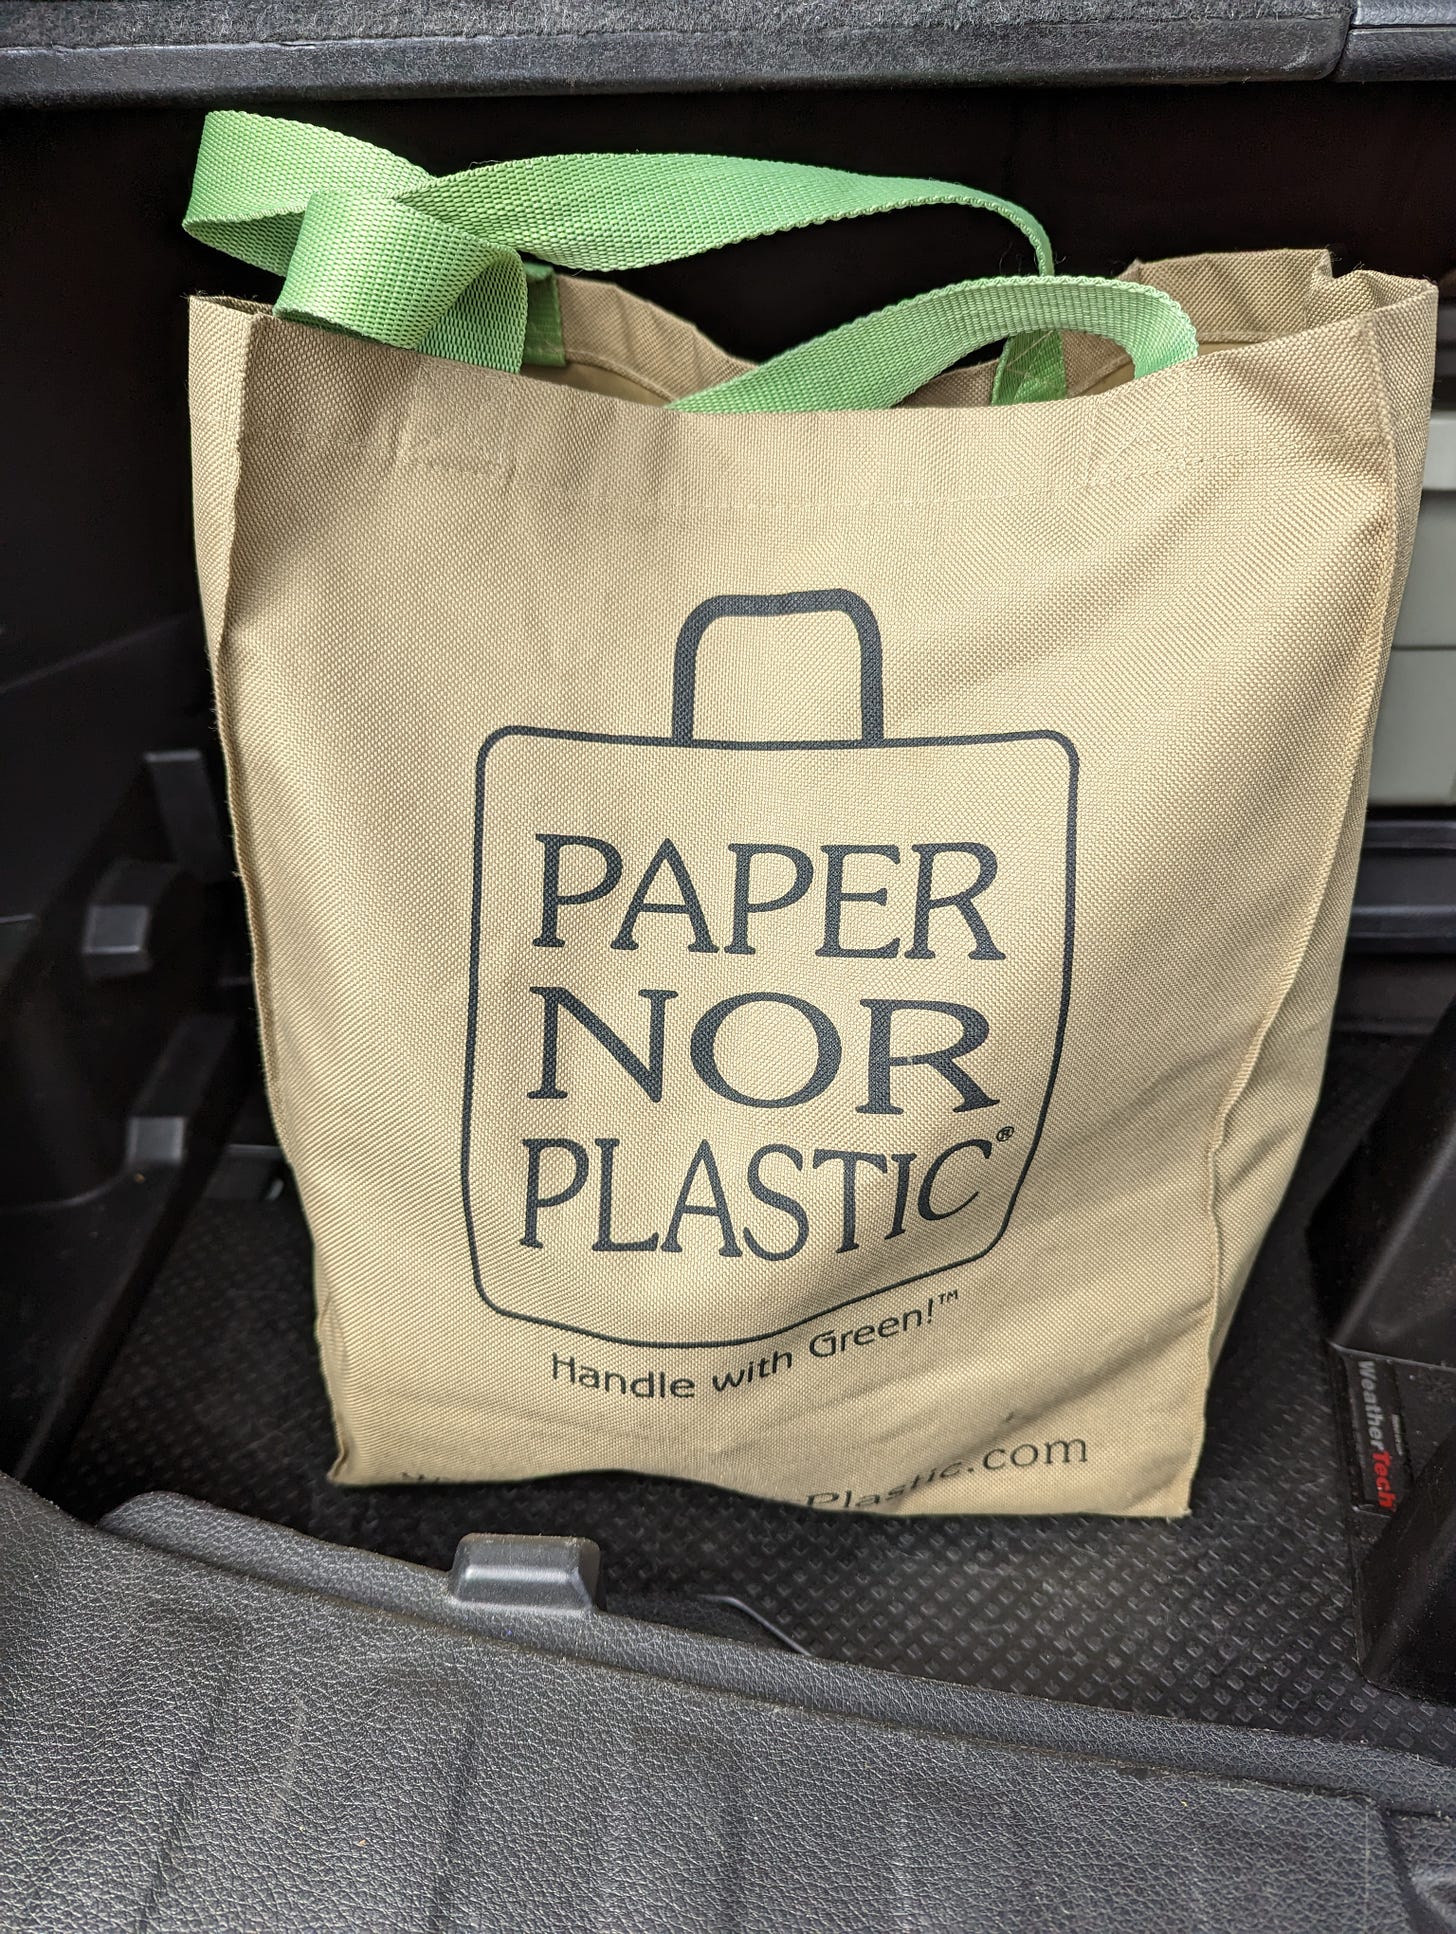 A reusable grocery bag sits in the back of a car. It's the same color and i\dimensions as a standard paper bag but with light green straps for handles and it reads in large font on the side "Paper Nor Plastic"